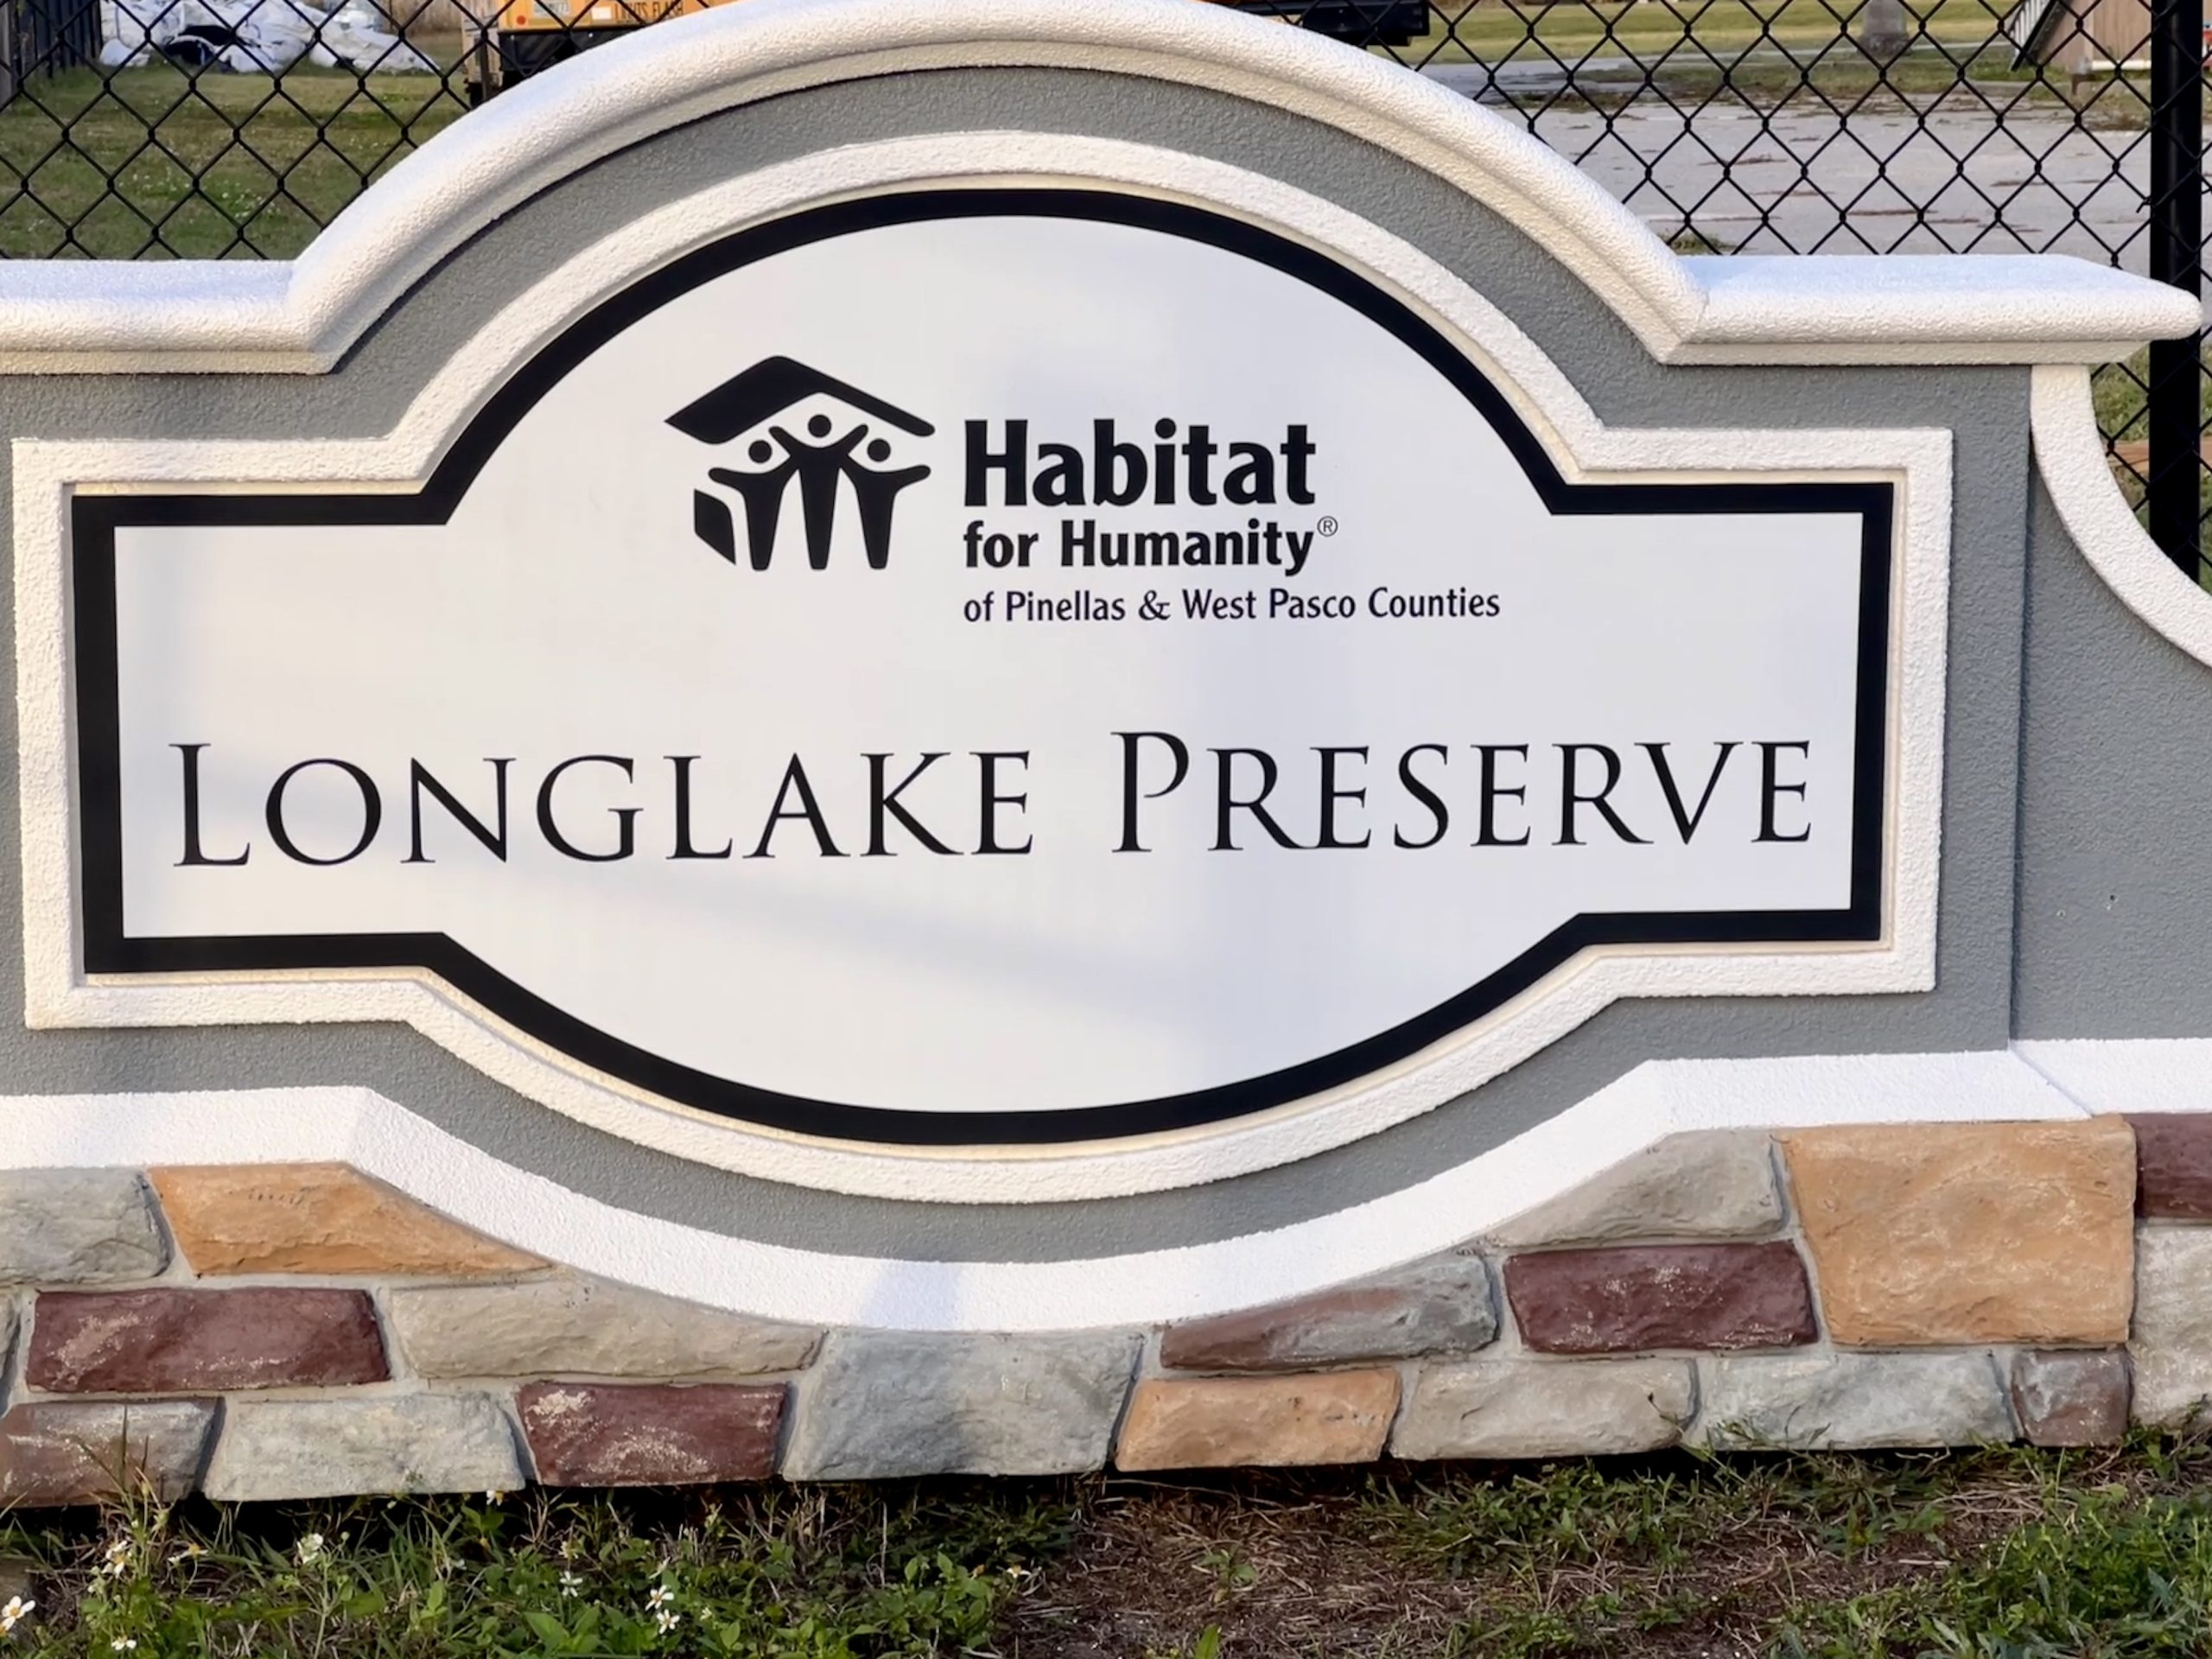 Habitat for Humanity's Longlake Preserve in Largo to include 54 townhouses